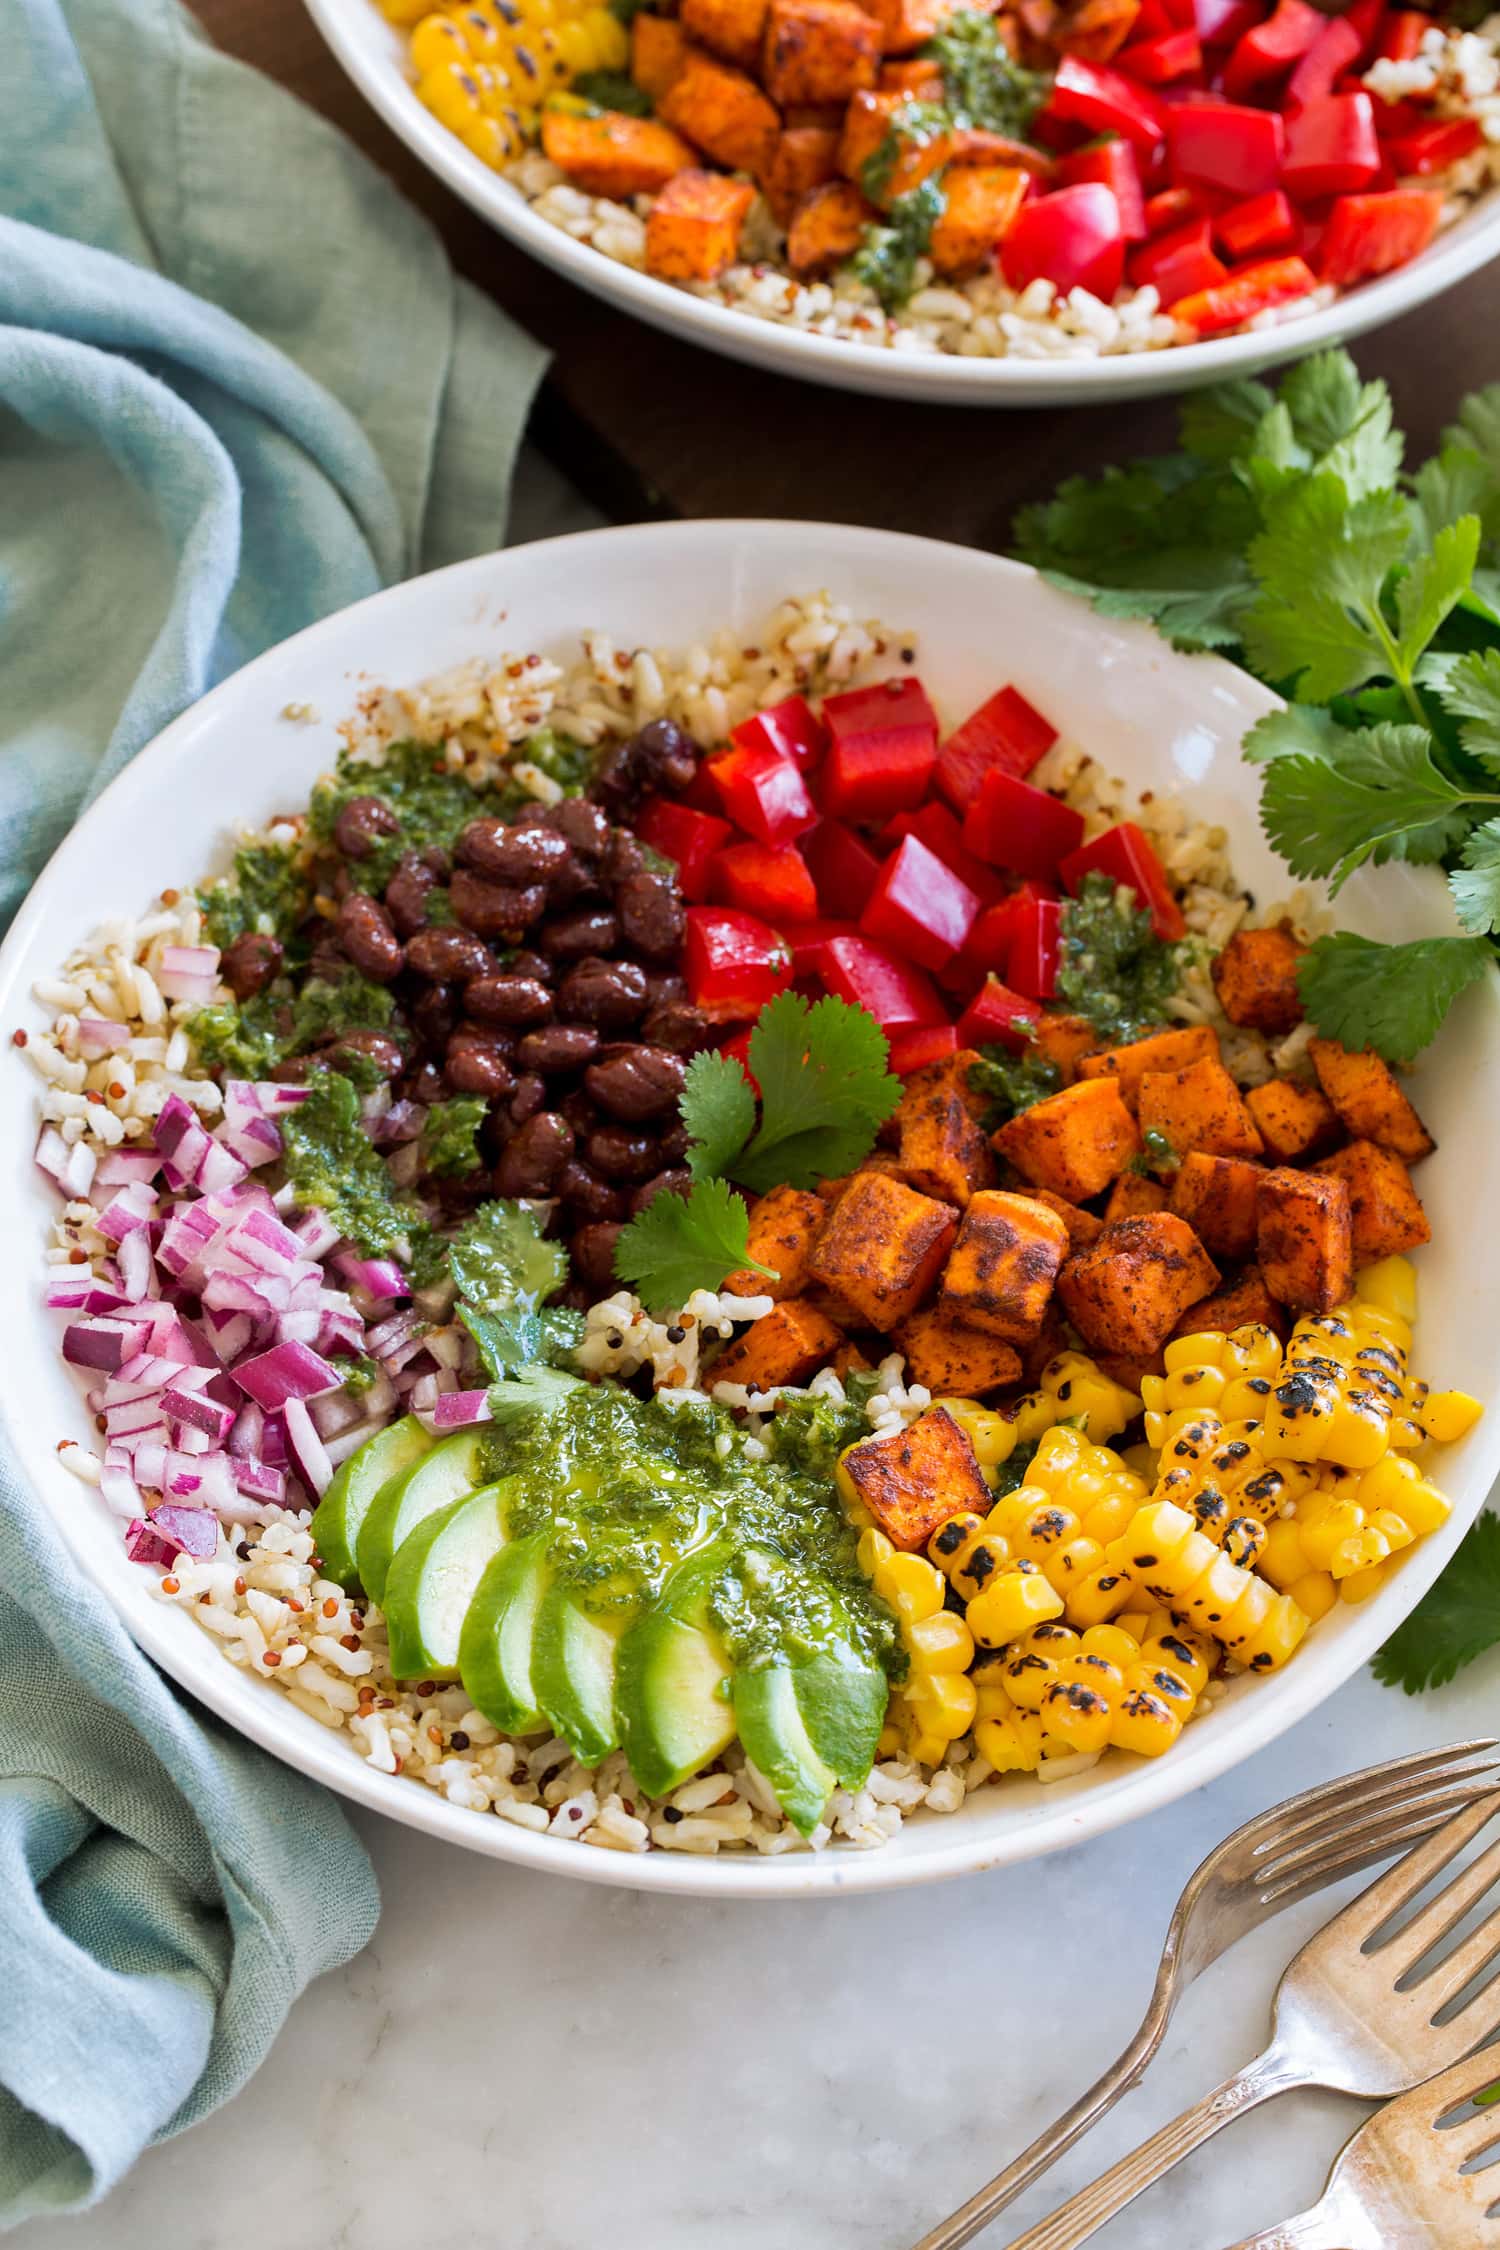 Baja grain bowl with black beans, tomatoes, sweet potatoes (or chicken), corn, avocado, red onion, brown rice and quinoa.